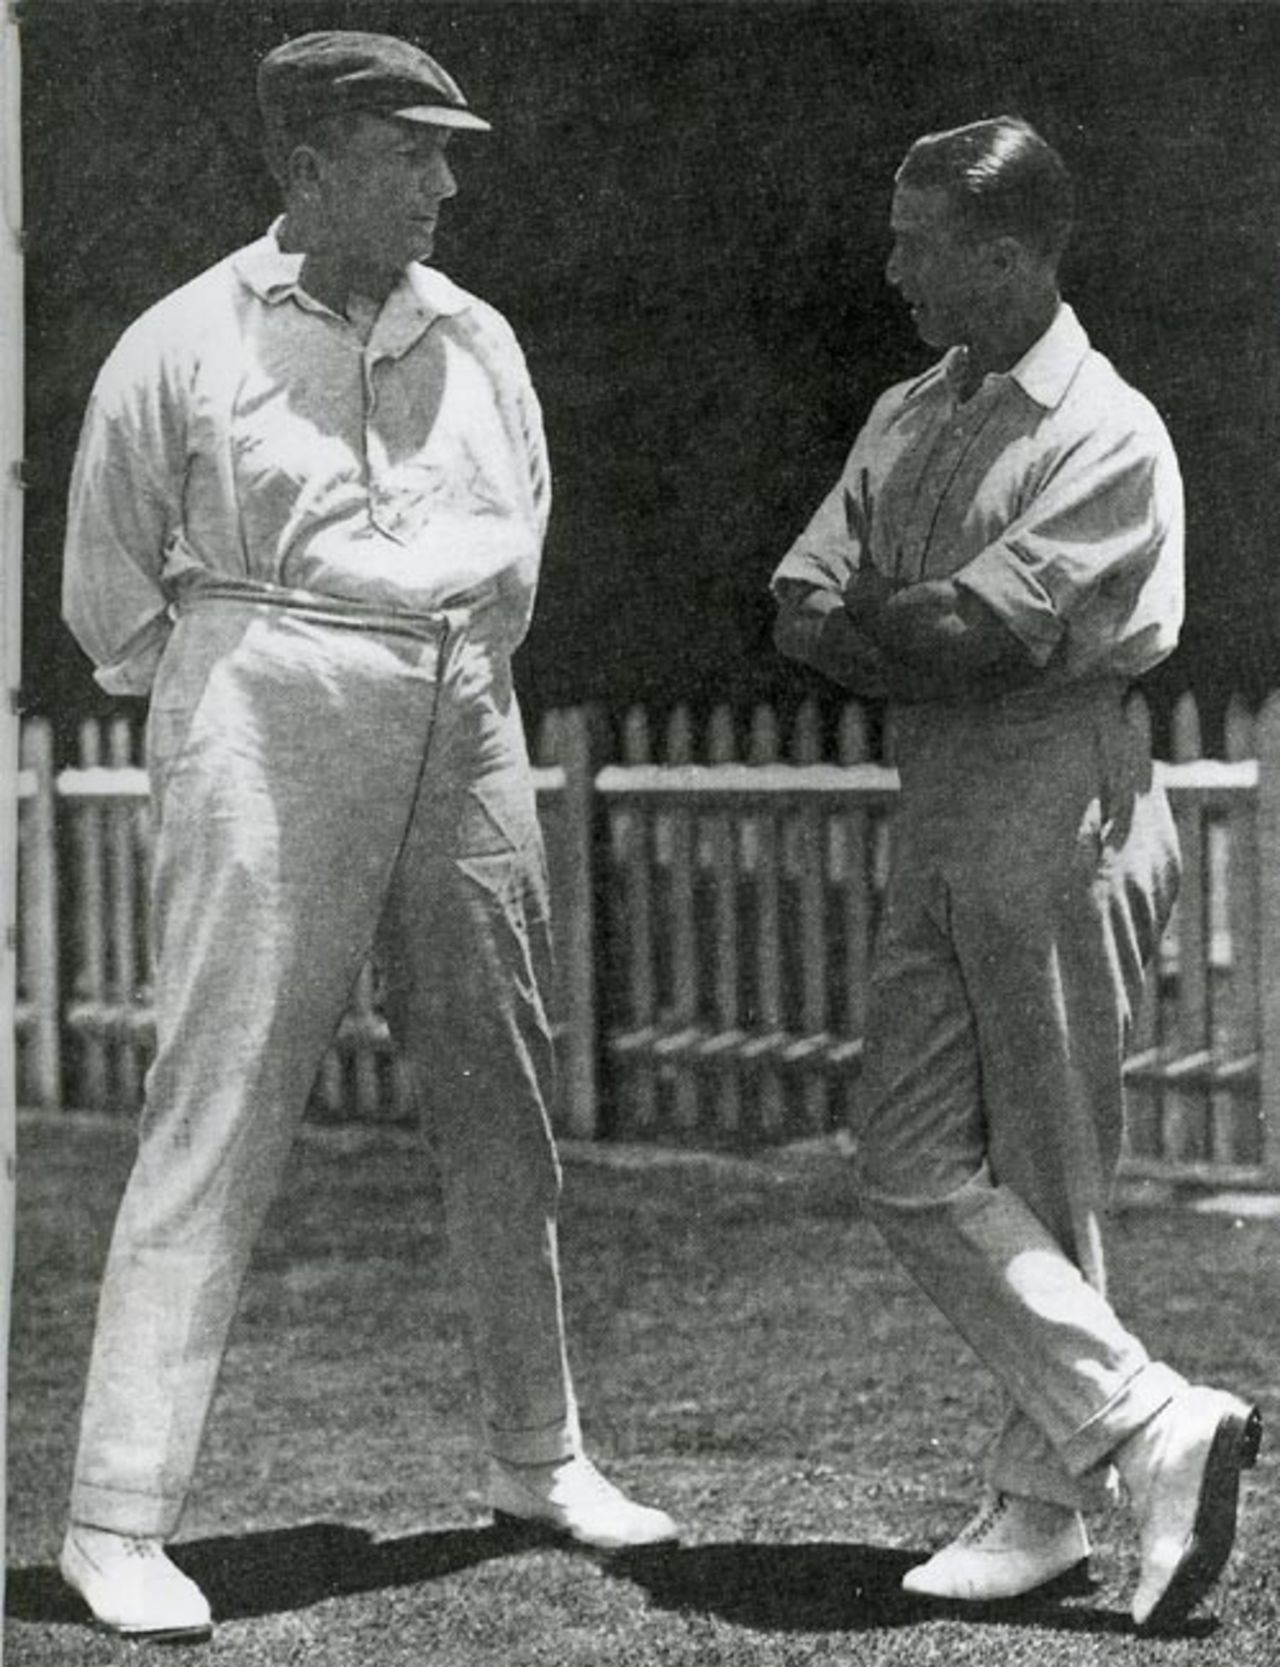 The giant Warwick Armstrong and Johnny Douglas ahead of the first Test at Sydney 1920-21